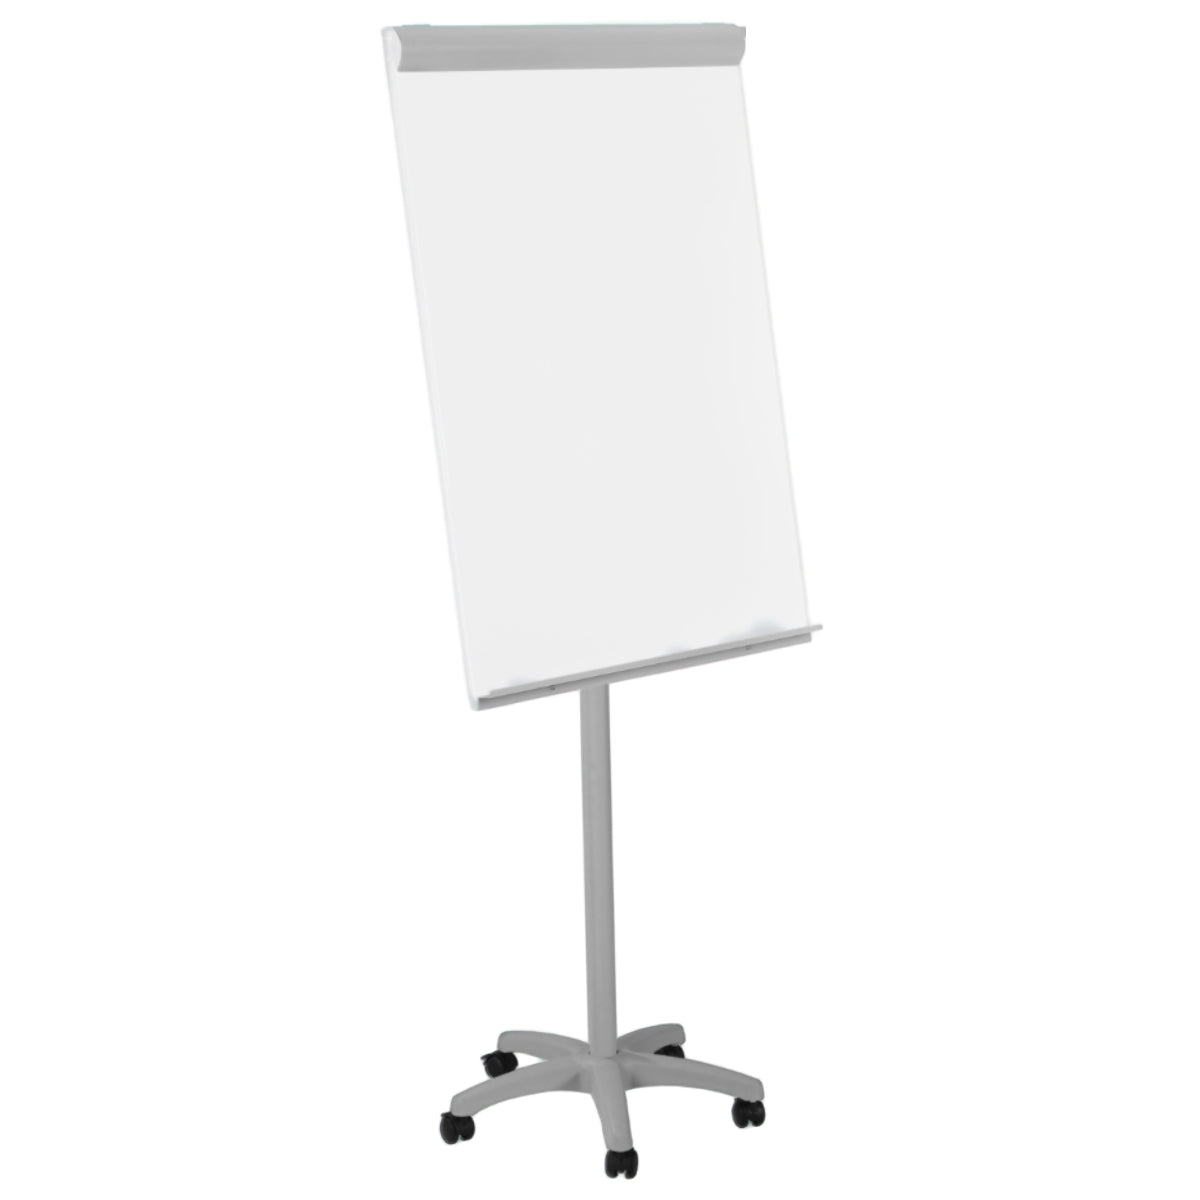 Flip Chart Boards & Easel Pads